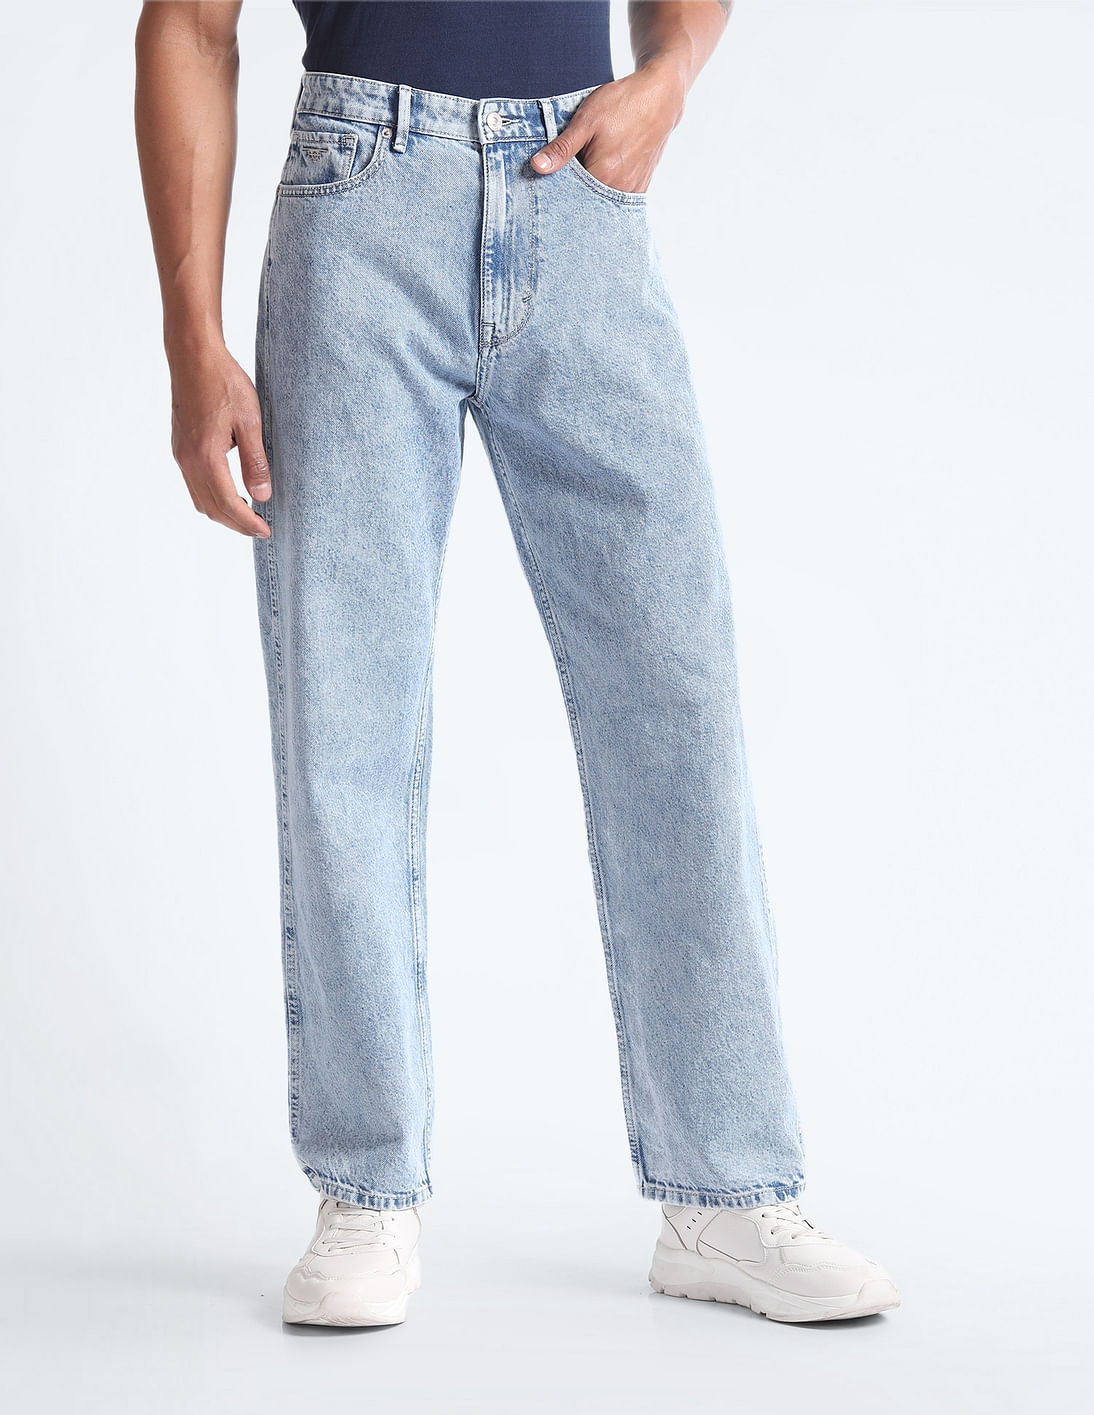 Buy Flying Machine Cobain 90s Loose Fit Rinsed Jeans - NNNOW.com